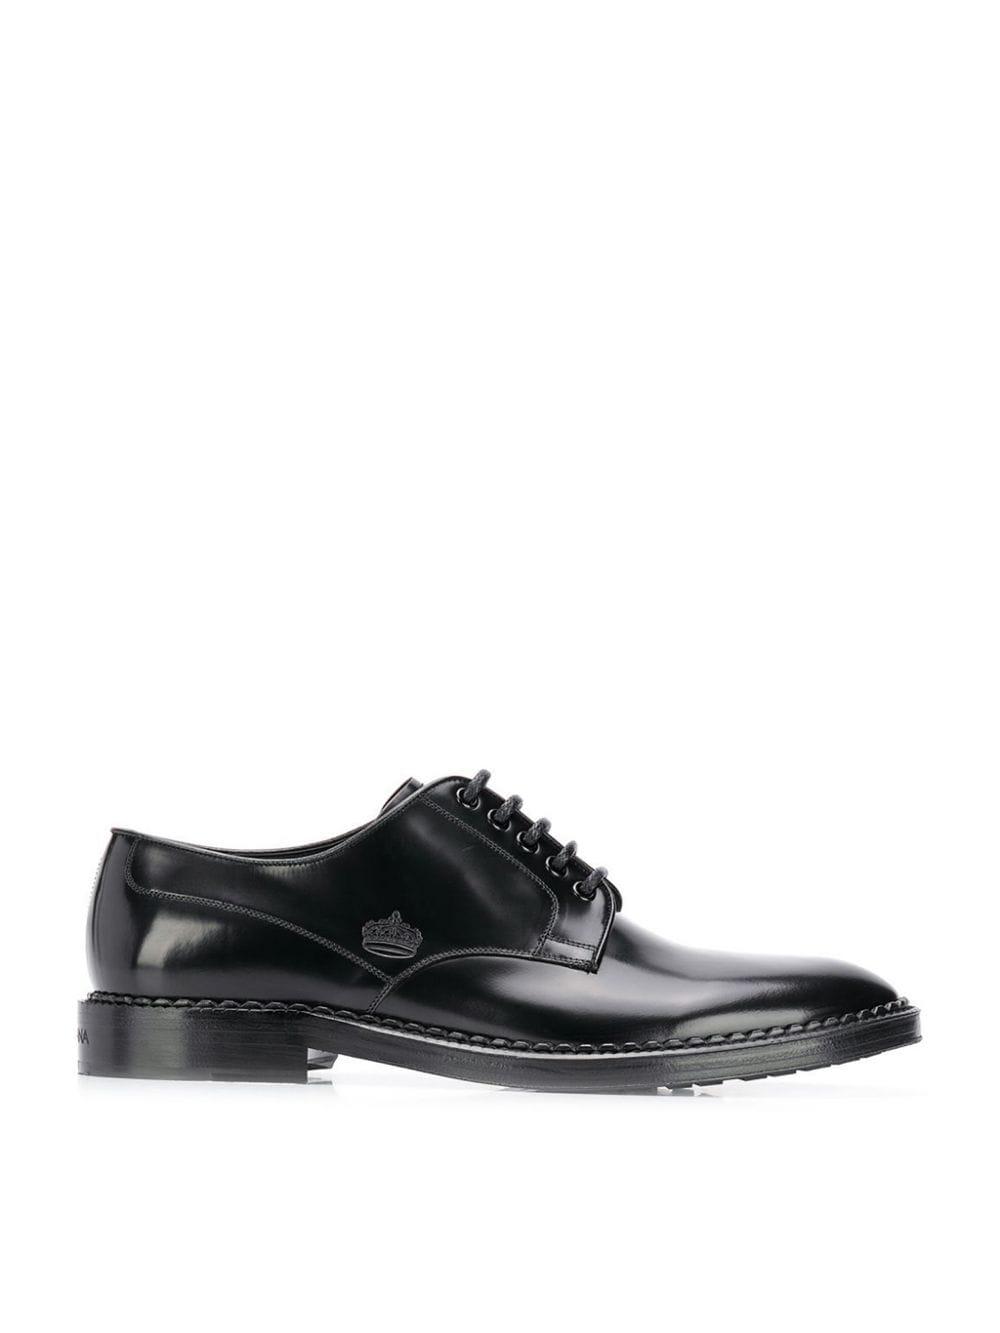 for Men Dolce & Gabbana Brushed Leather Derby Shoes With Branded Plate in Nero Save 16% Mens Shoes Lace-ups Derby shoes Black 